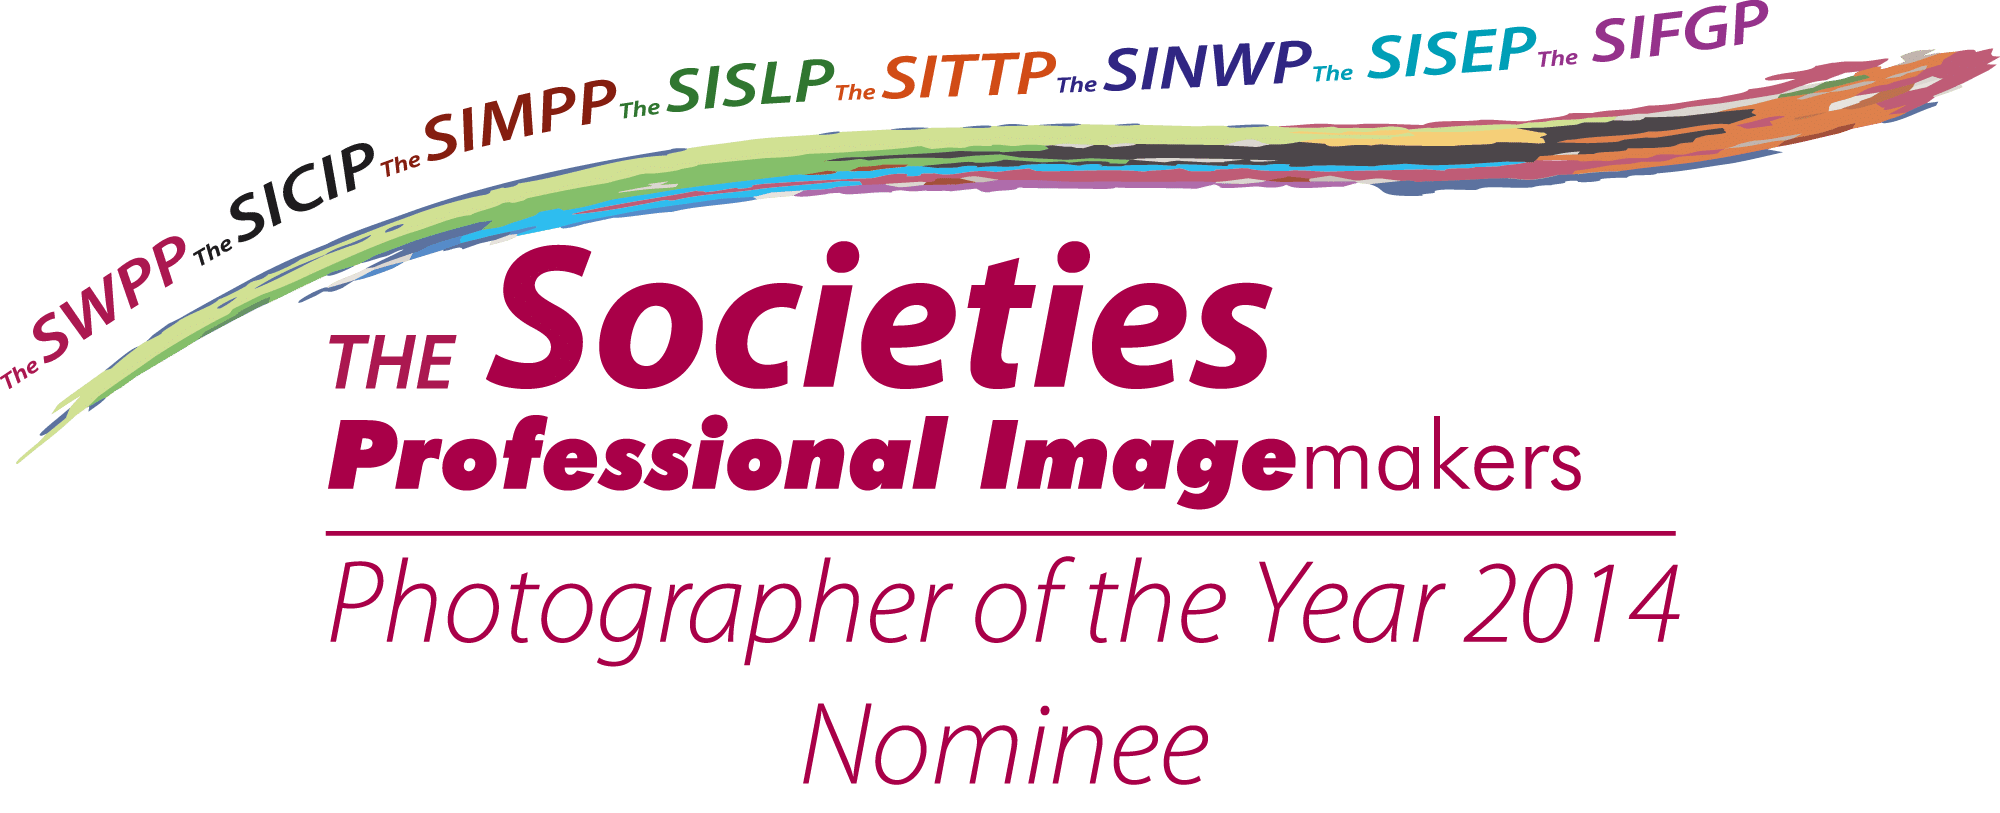 SWPP Photographer of the year nomination